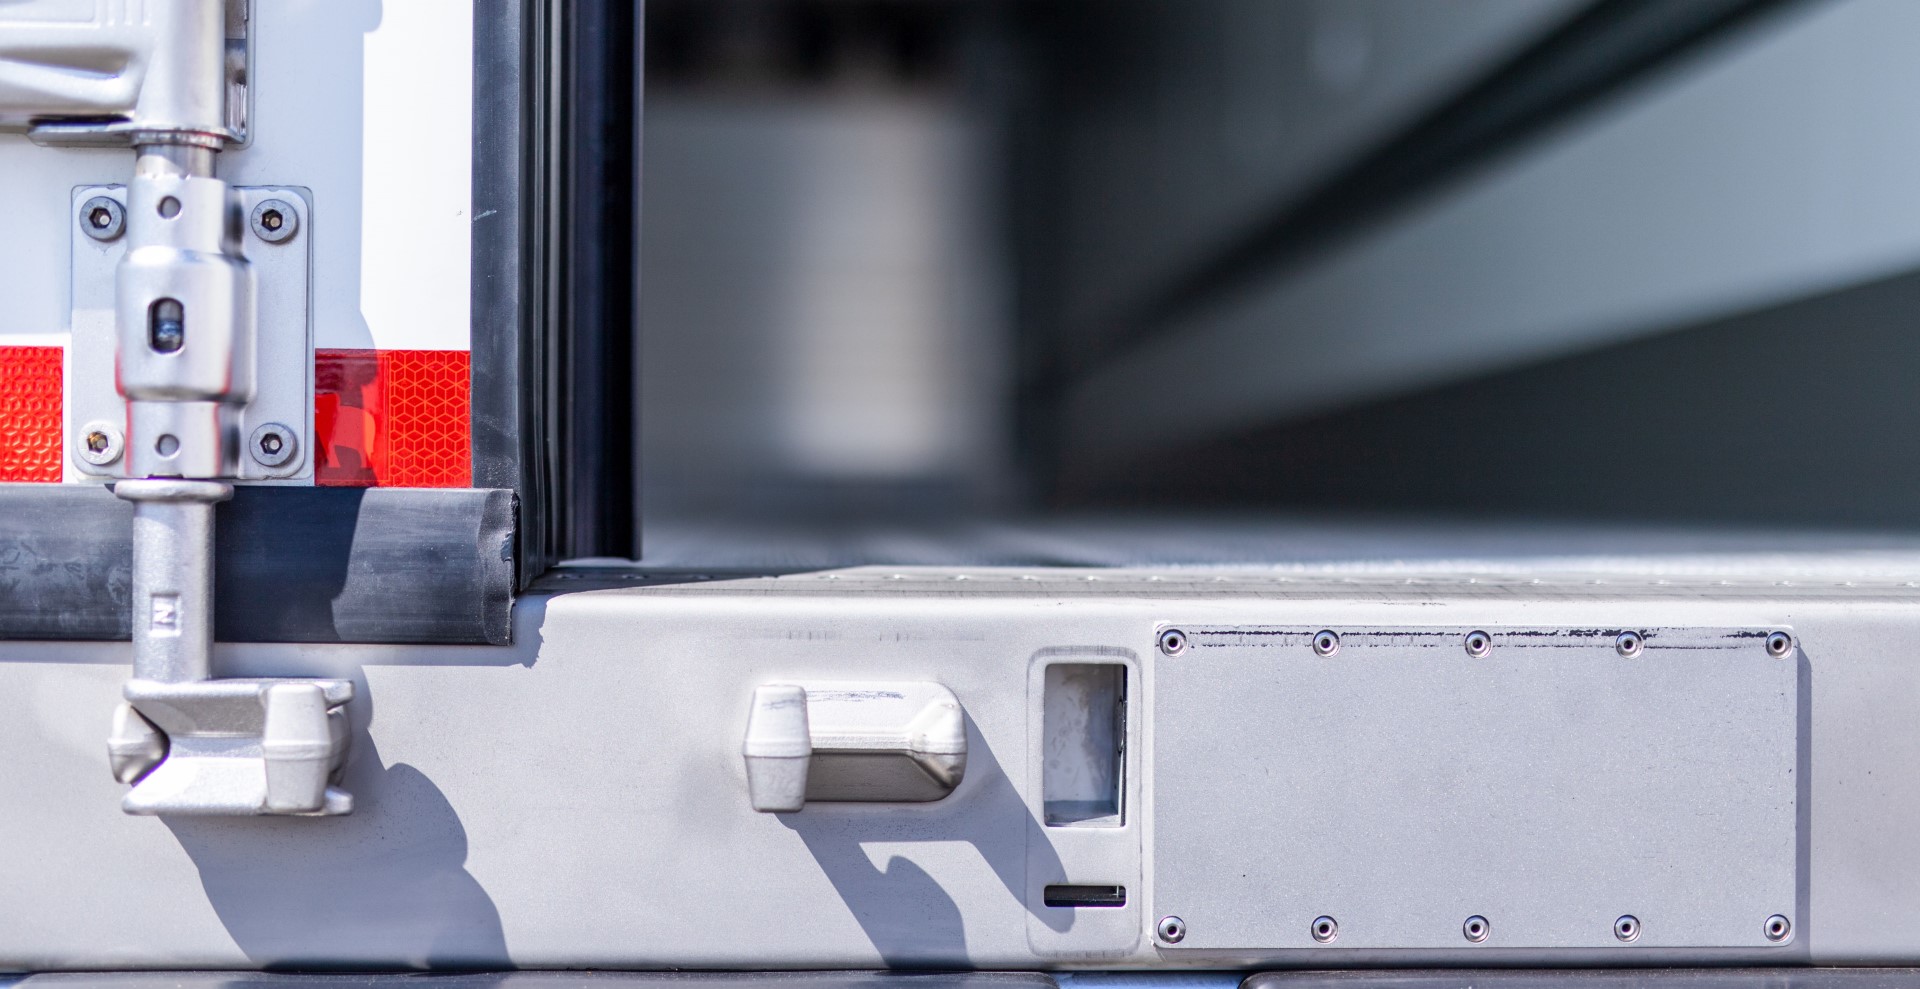 The new TL4 door locking system offers safety for cargo and drivers